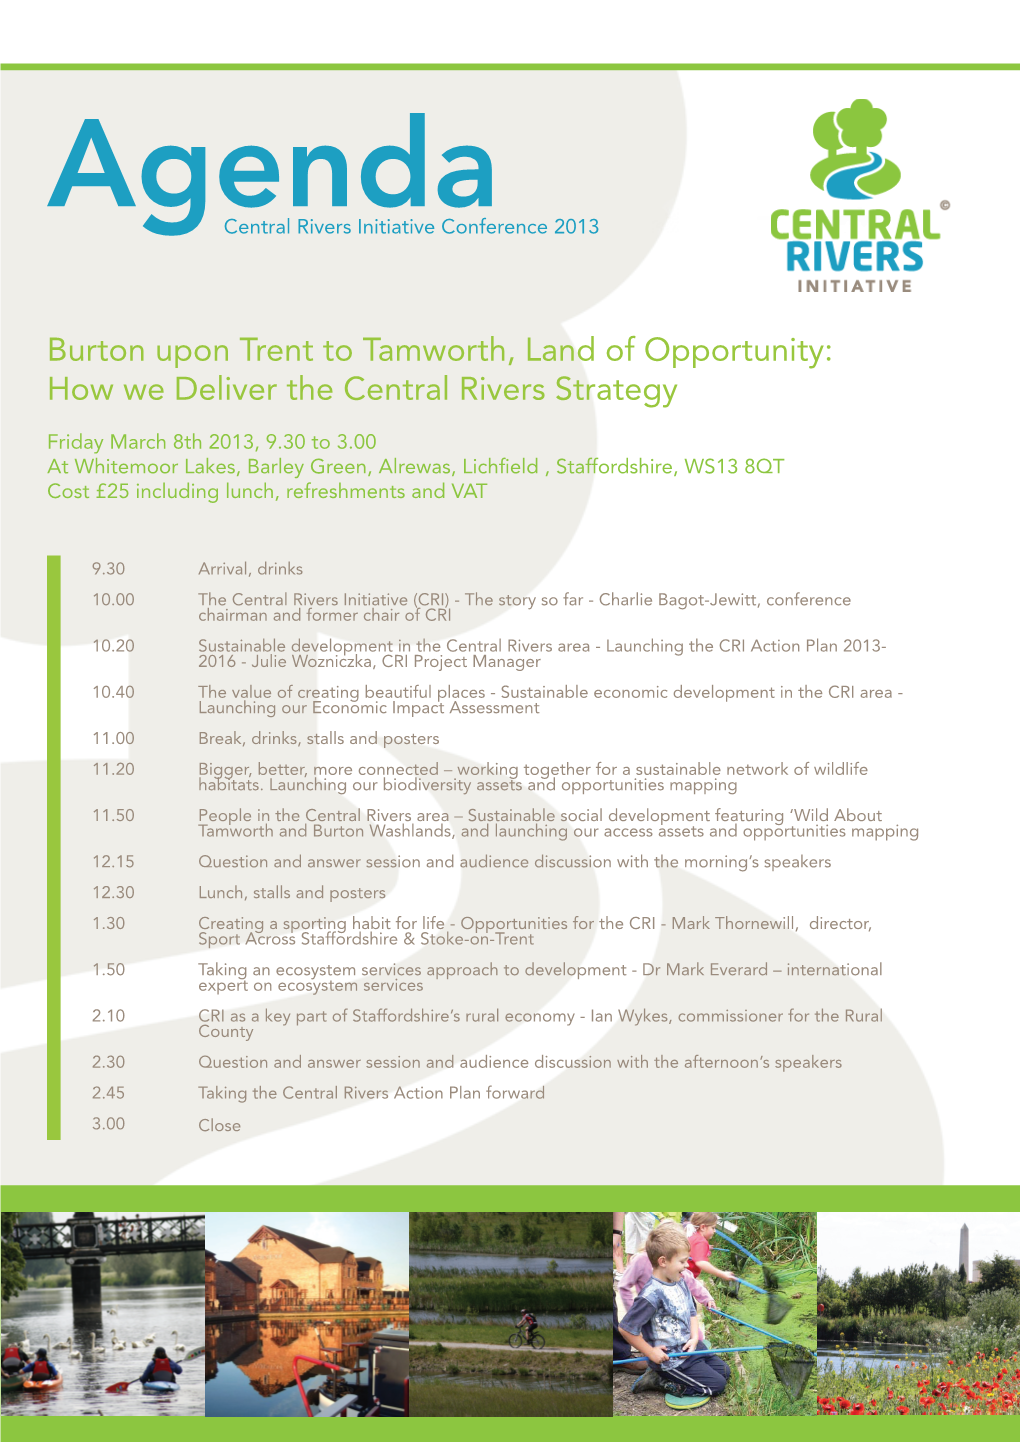 Burton Upon Trent to Tamworth, Land of Opportunity: How We Deliver the Central Rivers Strategy